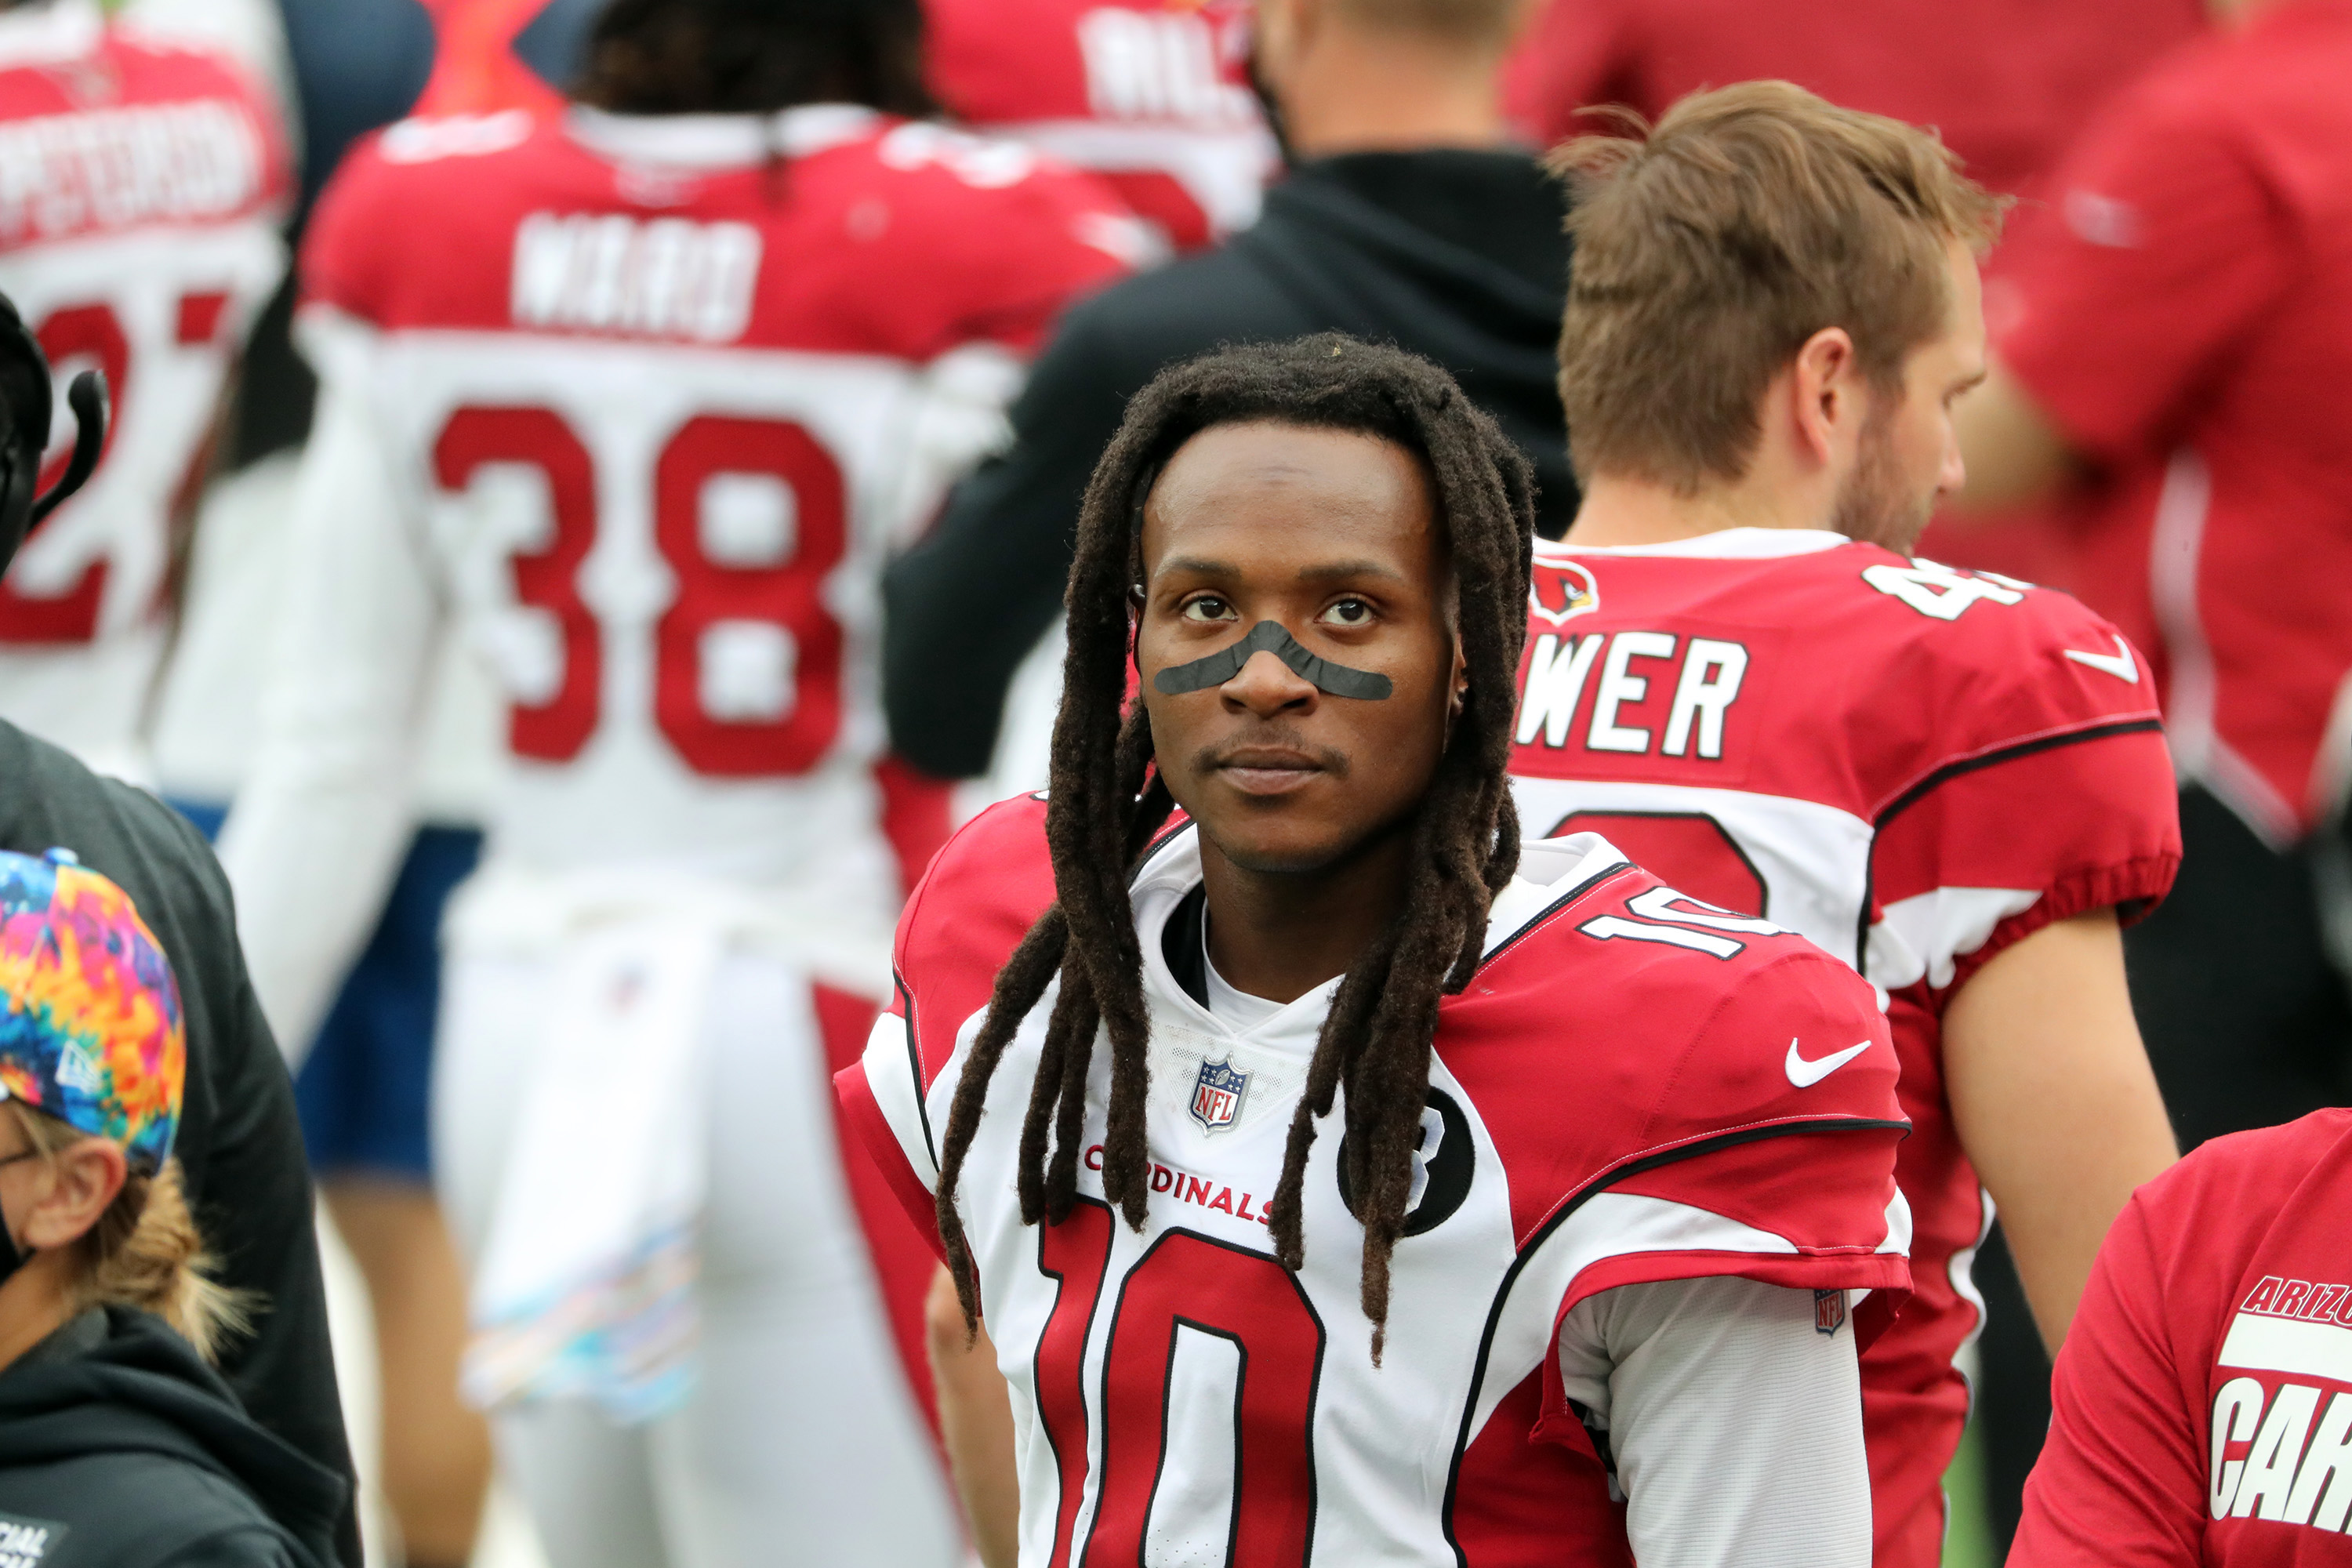 DeAndre Hopkins looks on from the sideline during a game